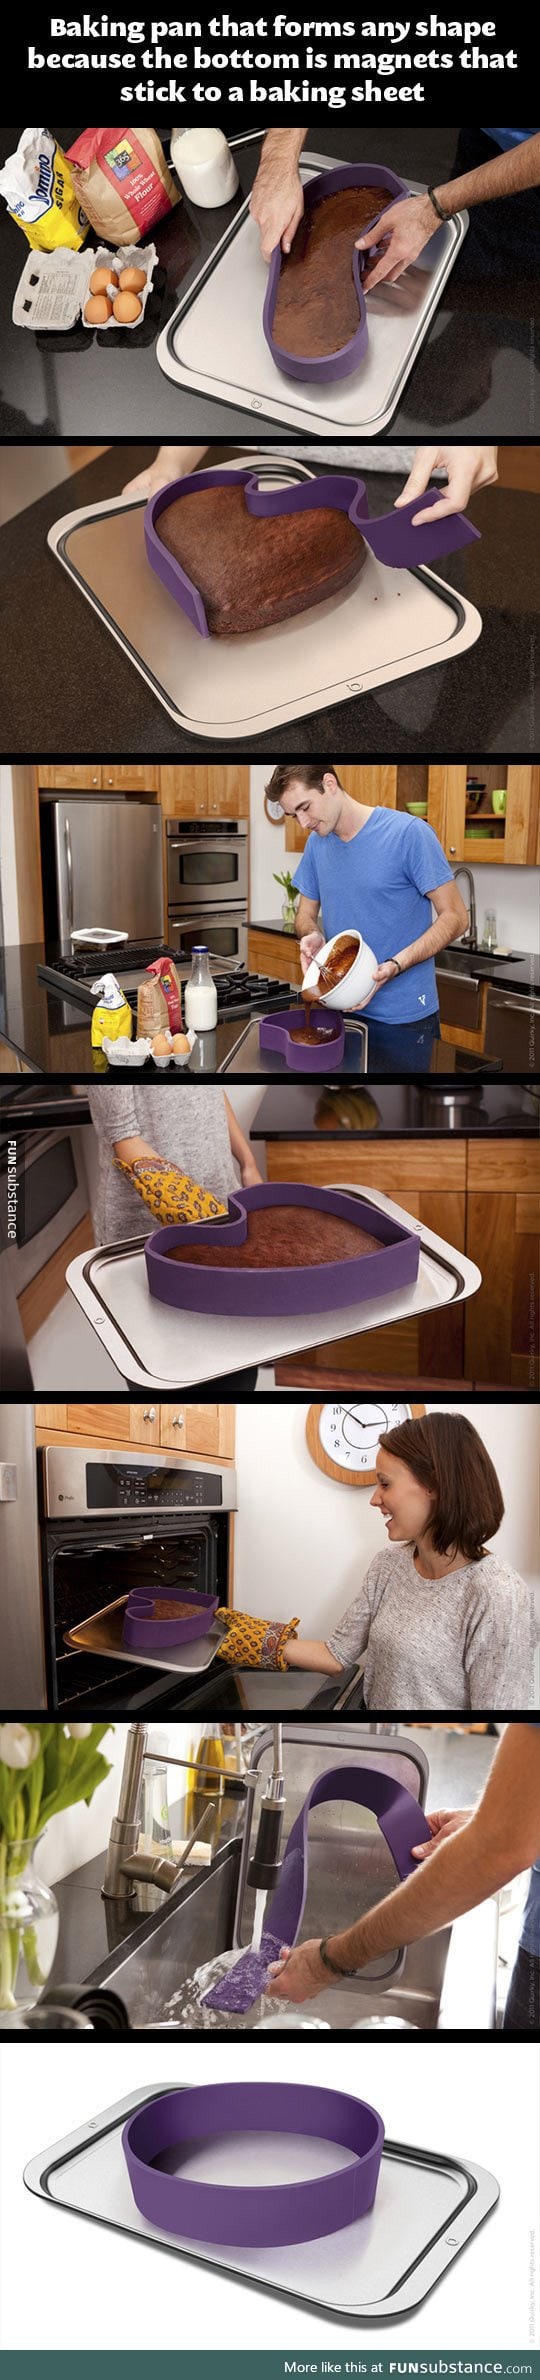 Clever baking pan with a twist